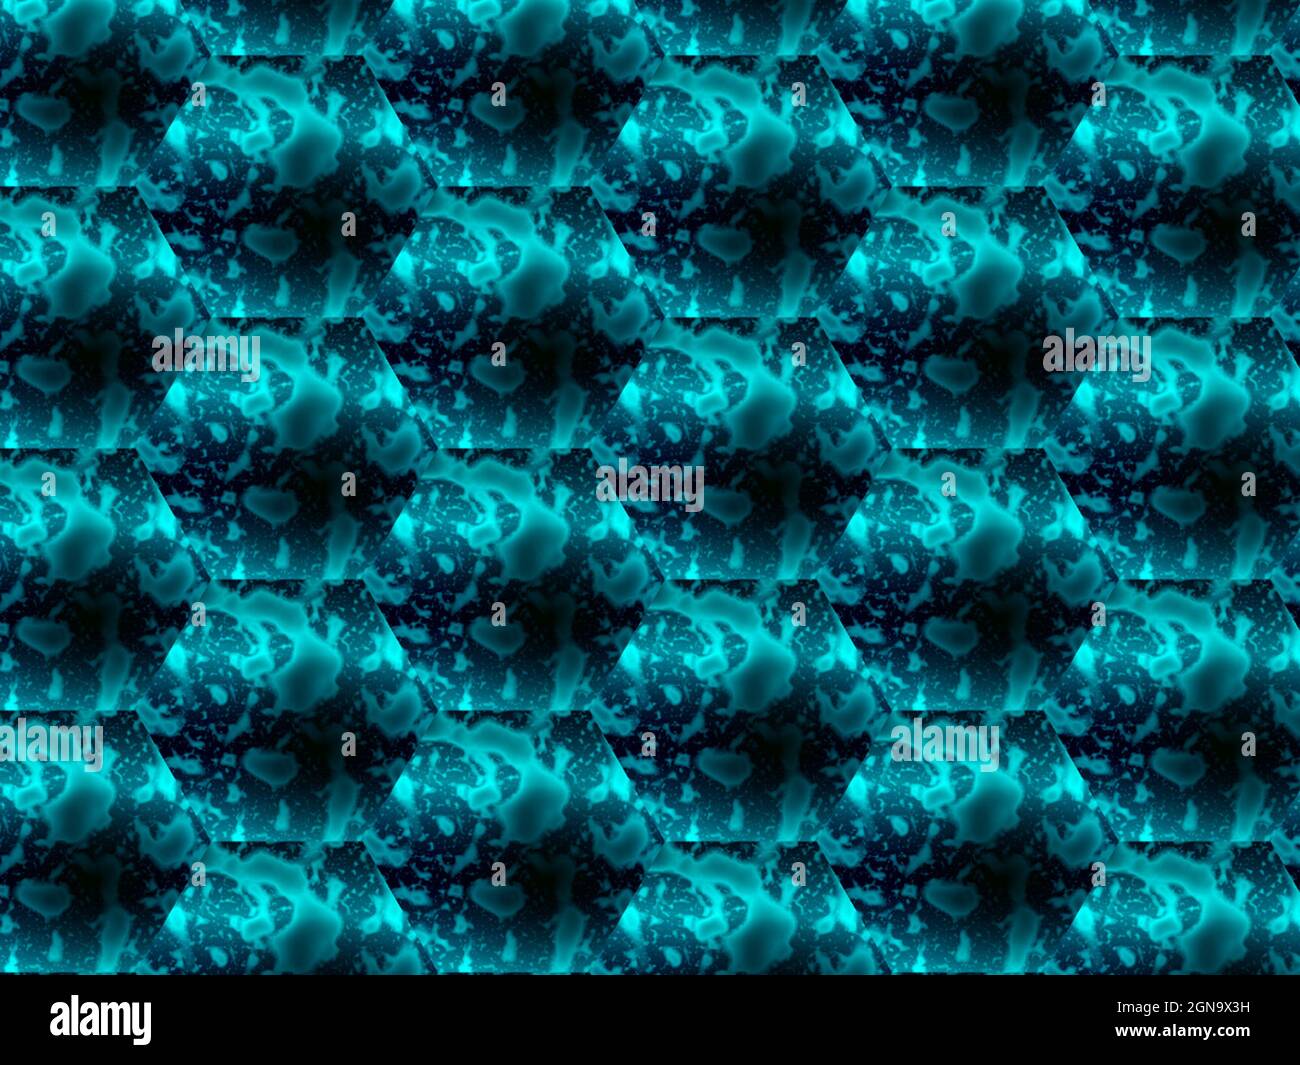 Abstract background, blue green emerald gradient decorative creative fluorescent forms dynamic decorative pattern Stock Photo